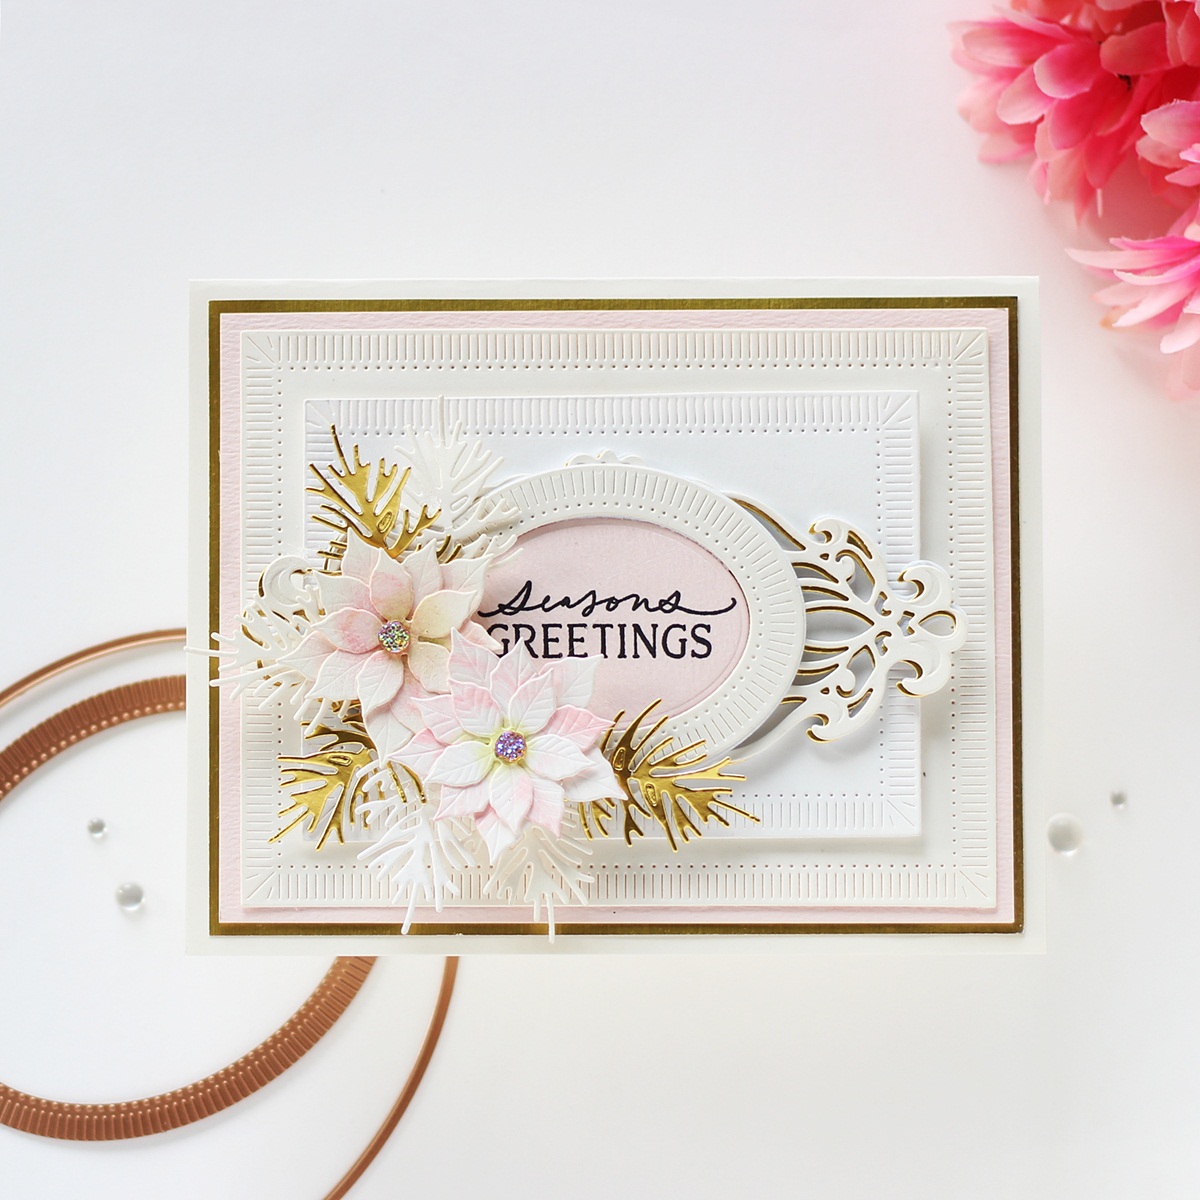 Handmade Cards using Spellbinders Fluted Classics Collection | Guest Post  by Hussena Calcuttawala - Spellbinders Blog